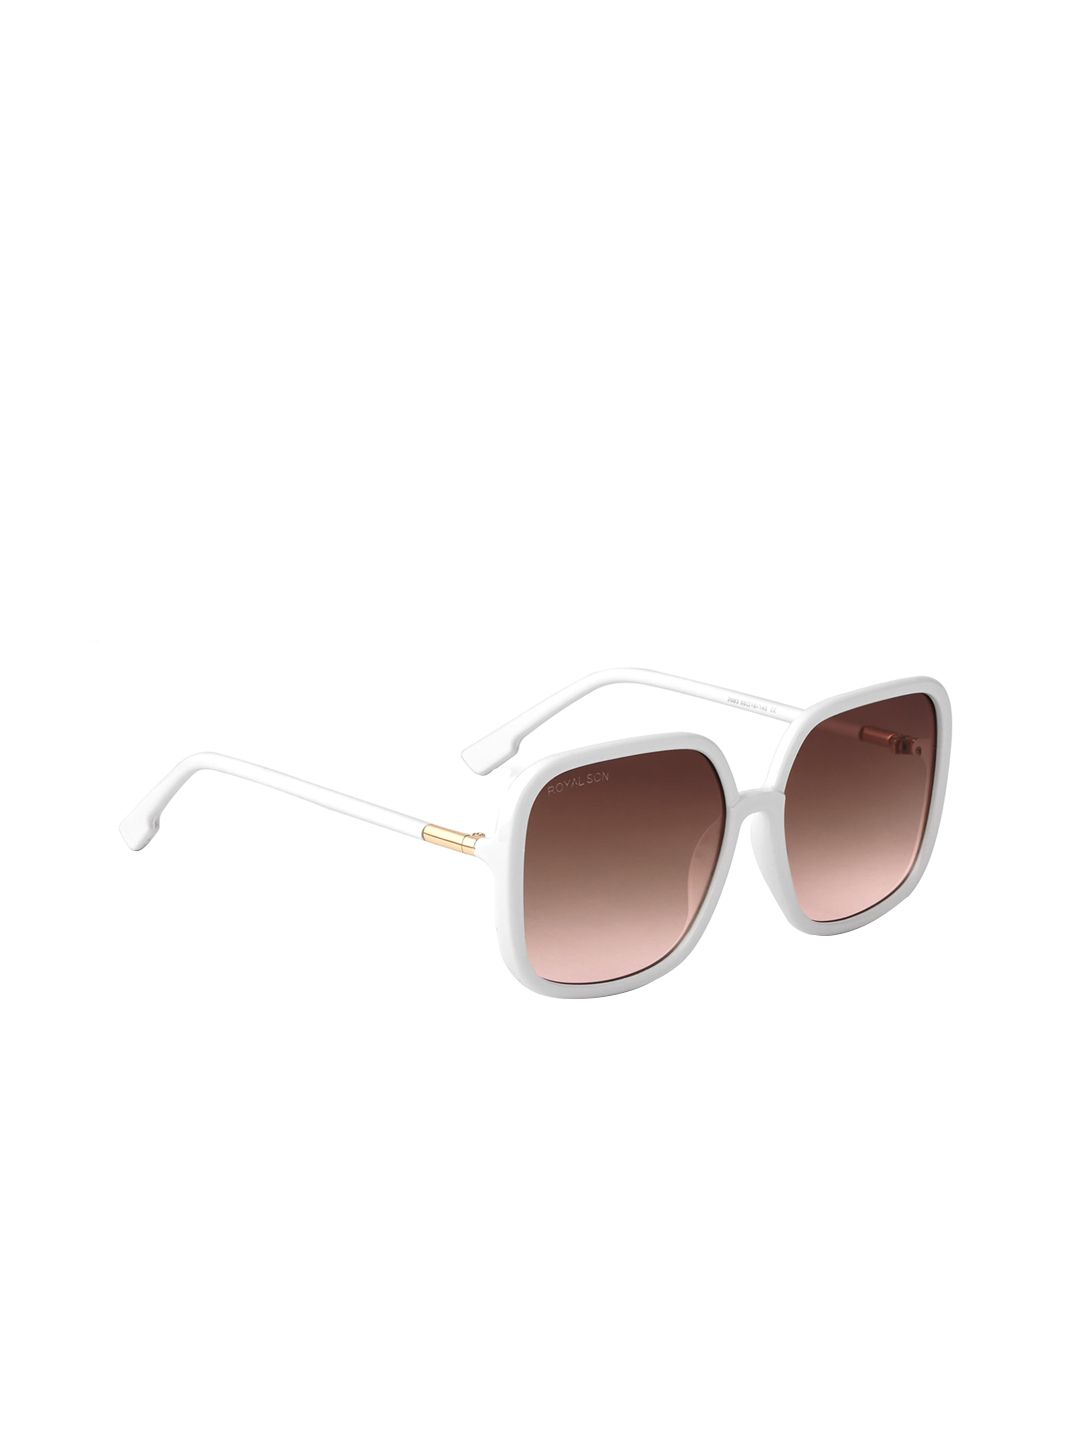 ROYAL SON Women UV Protected Oversized Sunglasses CHI0096-C8-R1 Price in India